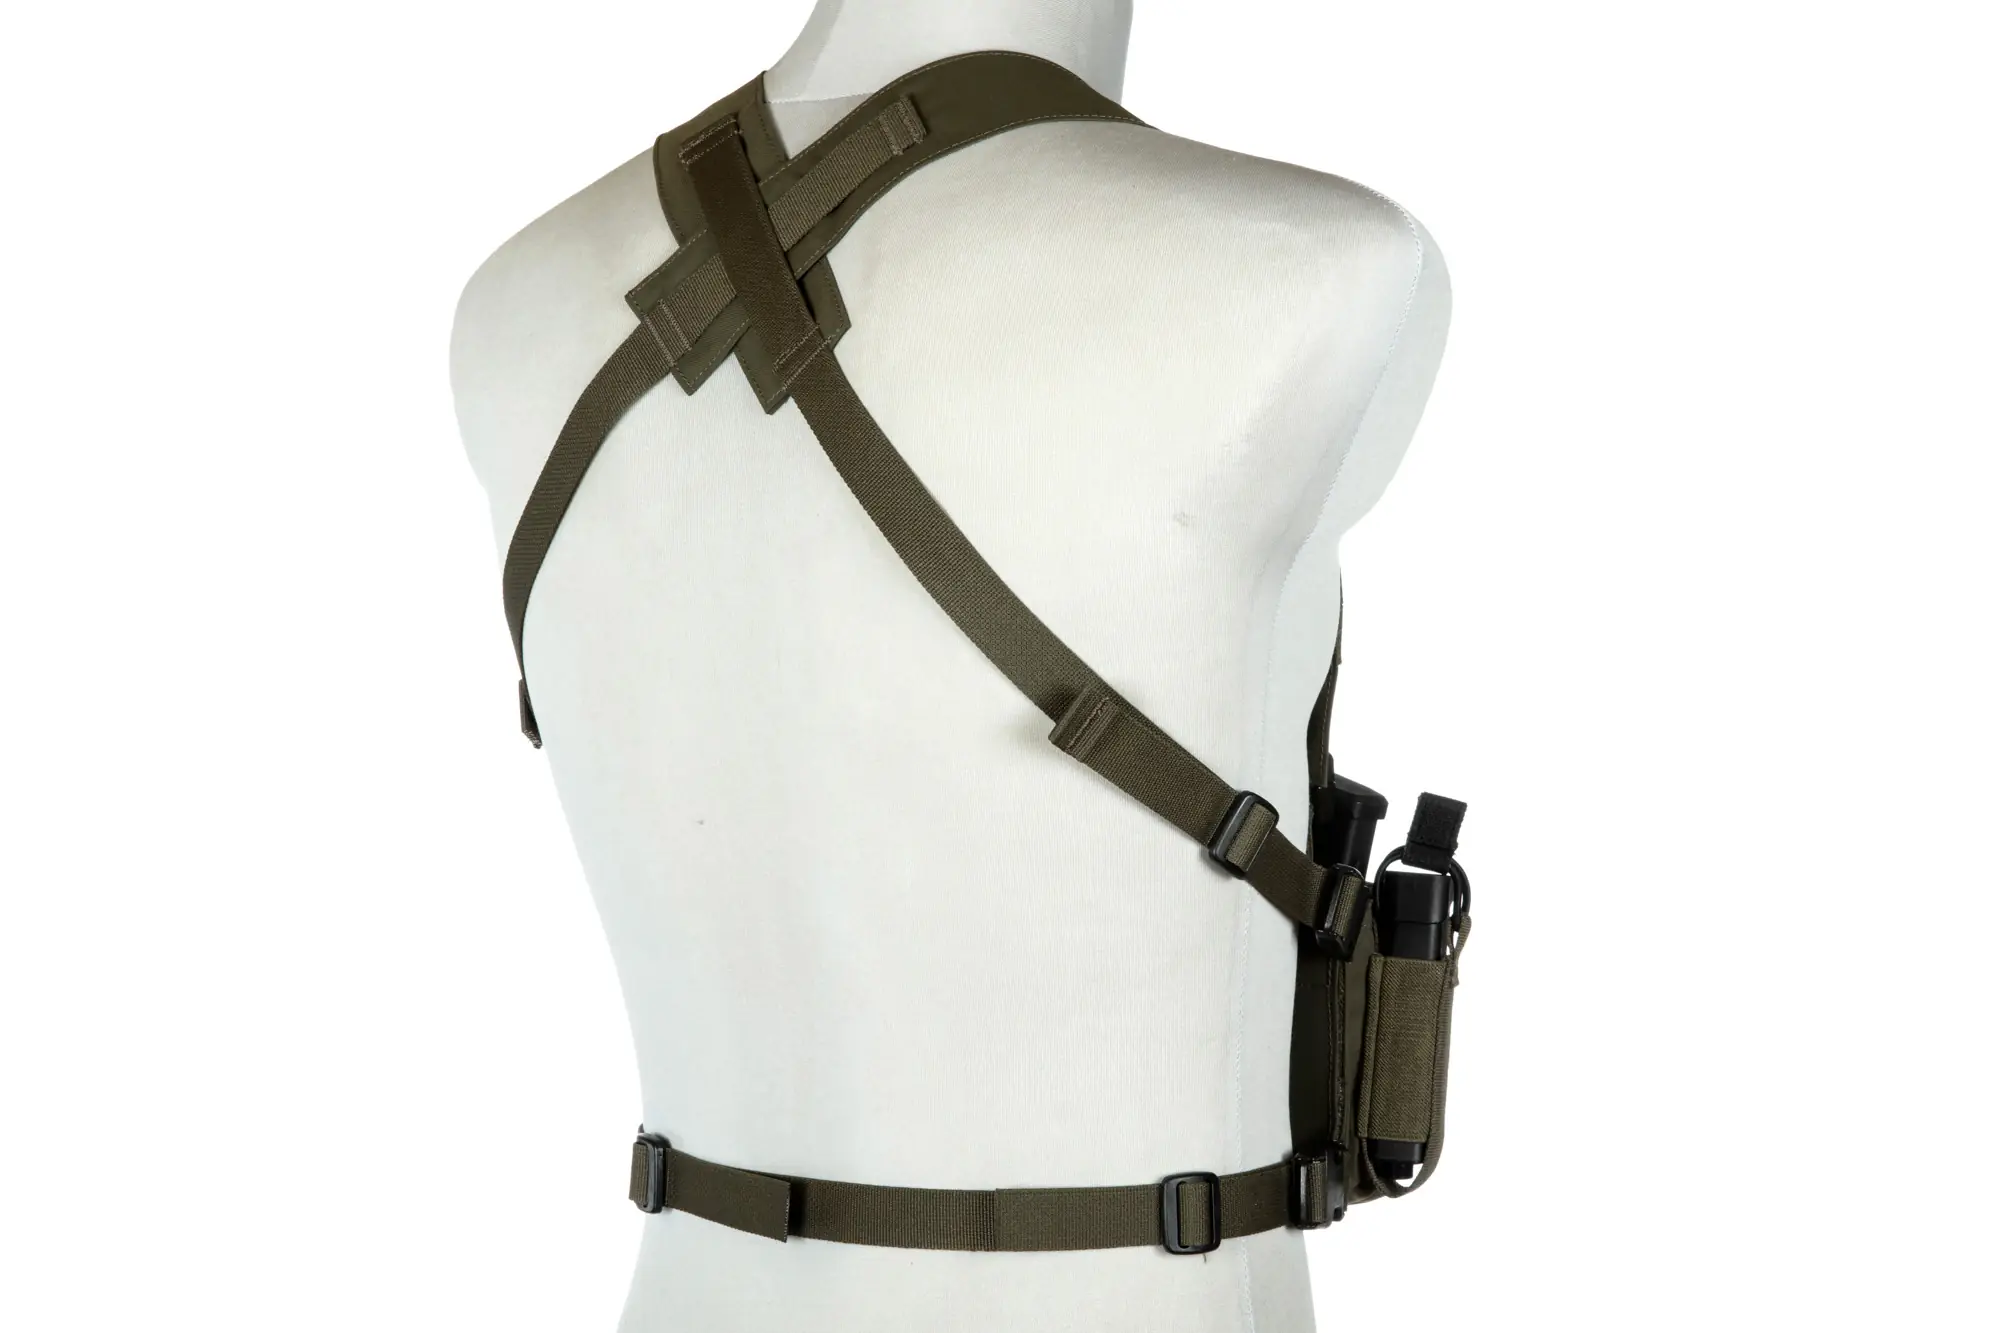 Tactical Chest Rig type D3CRM - Ranger Green